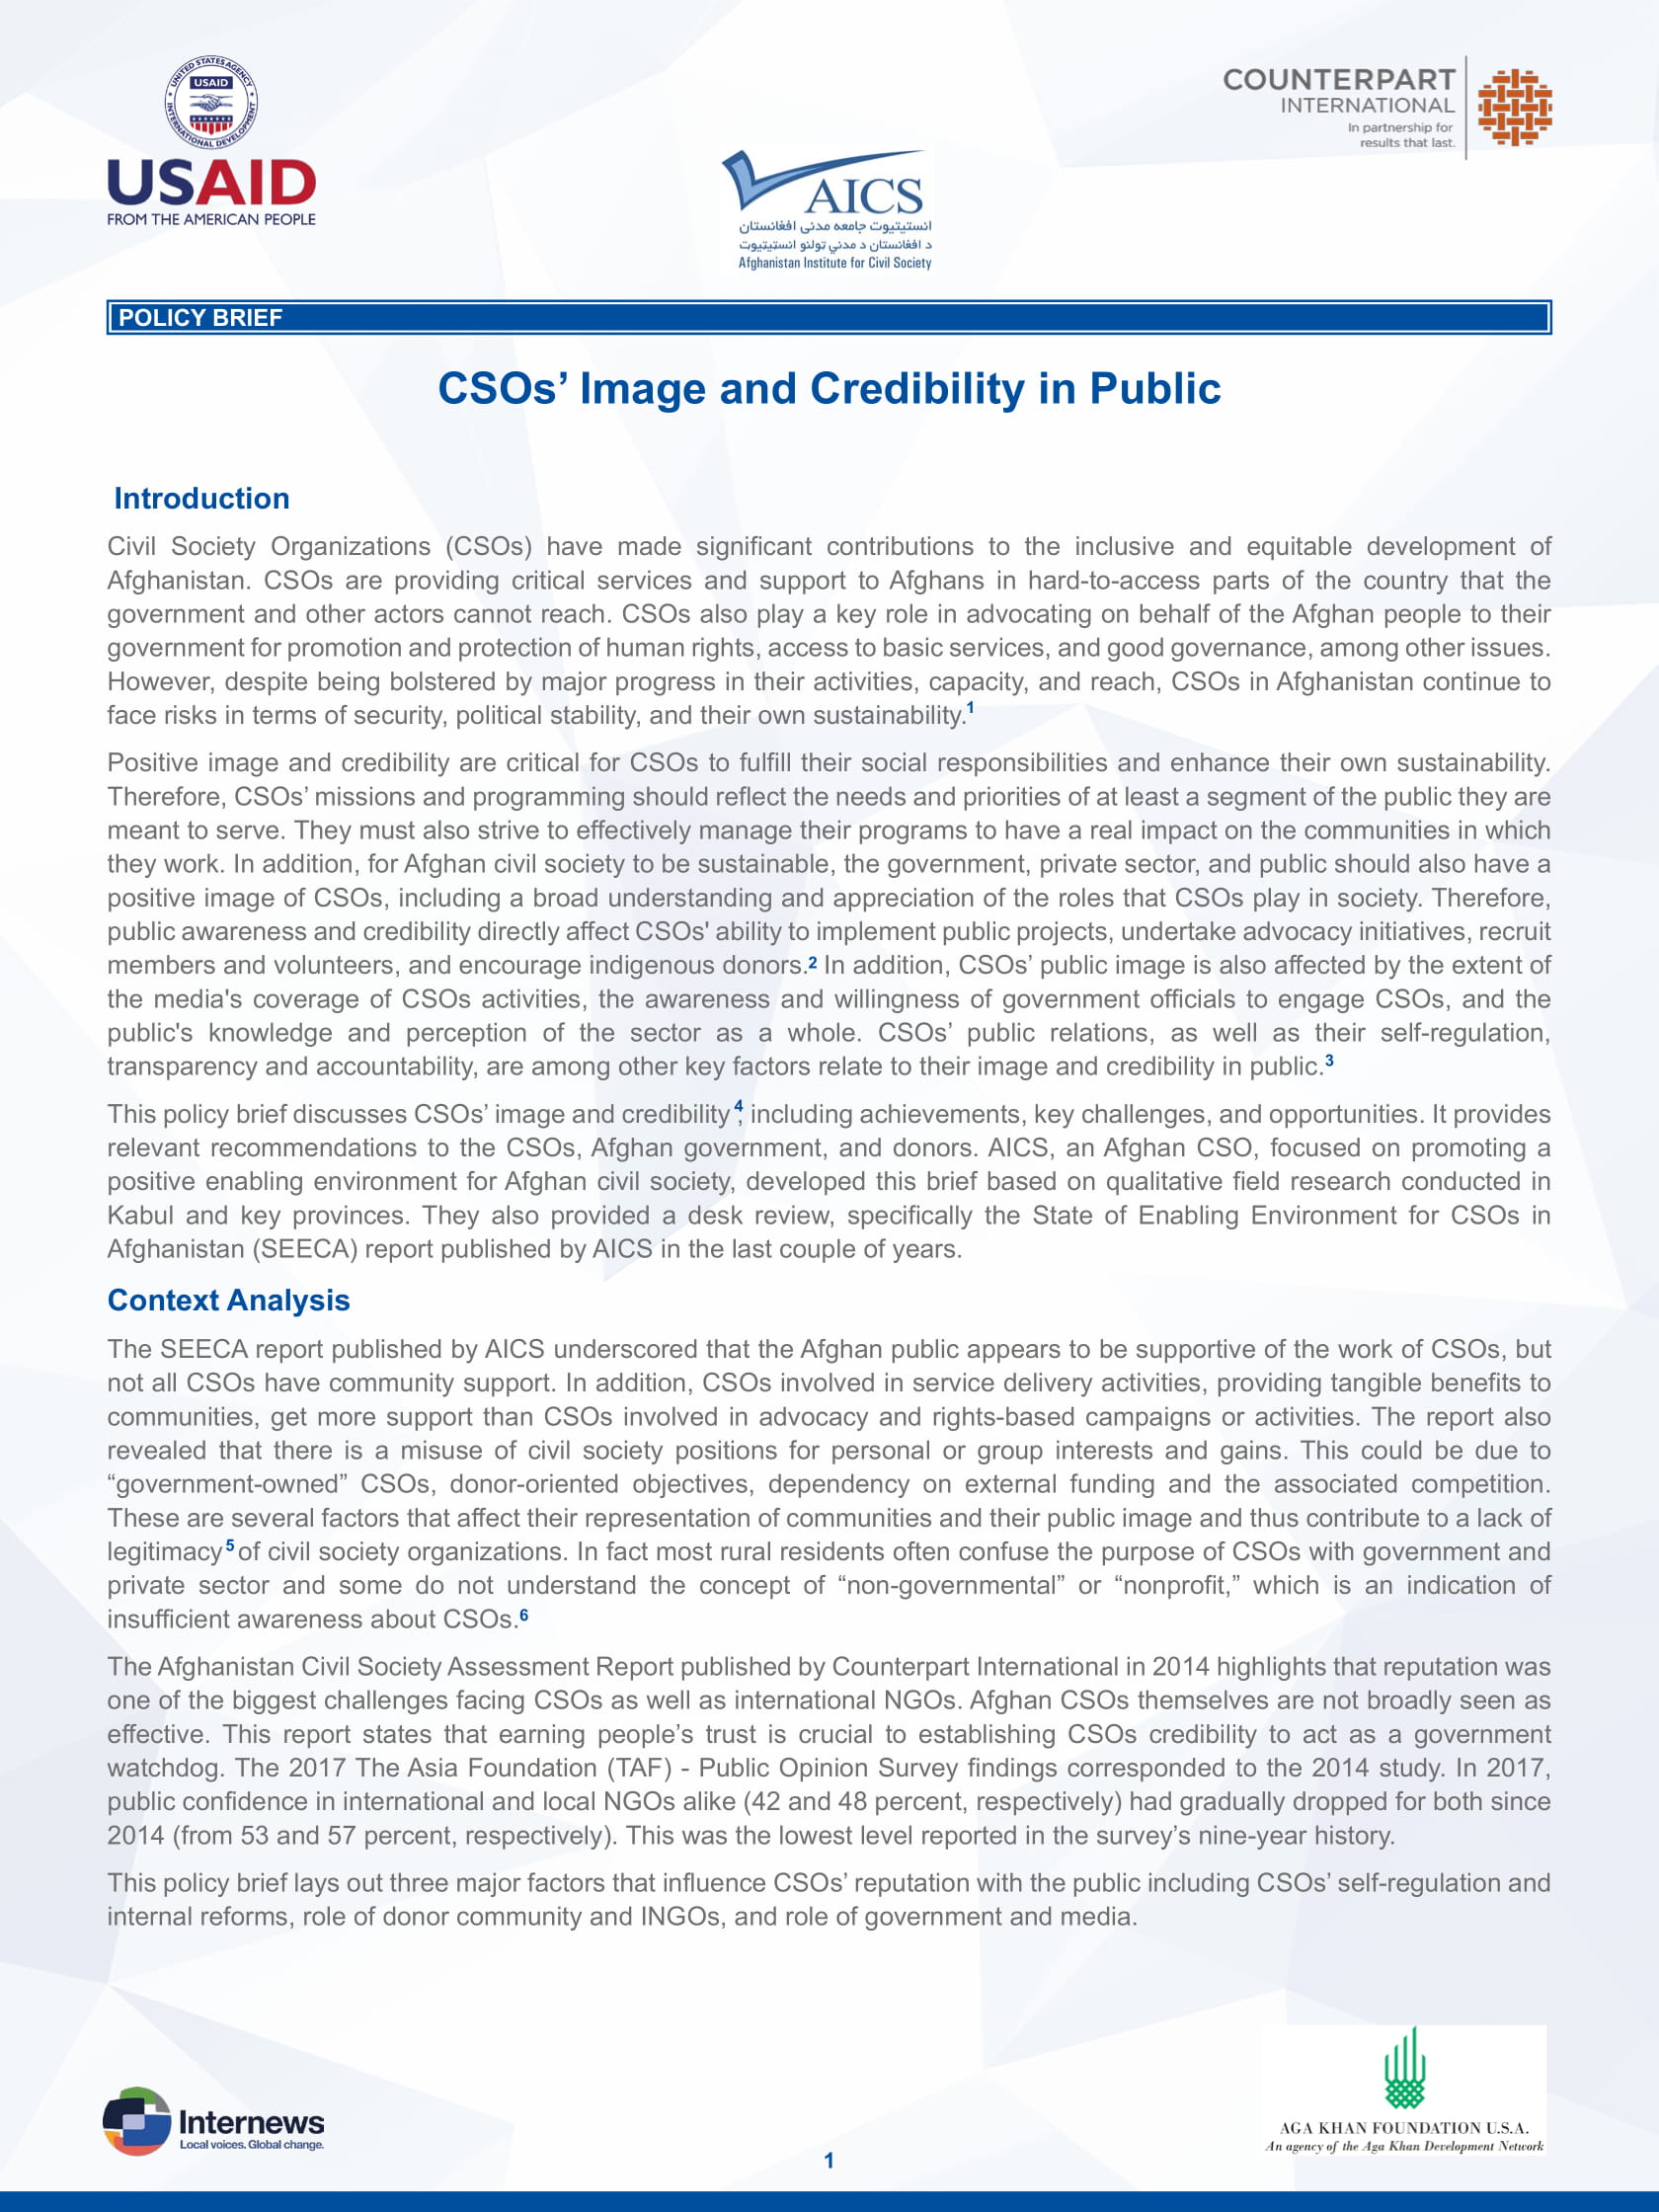 CSOs’ Image and Credibility in Public 2018